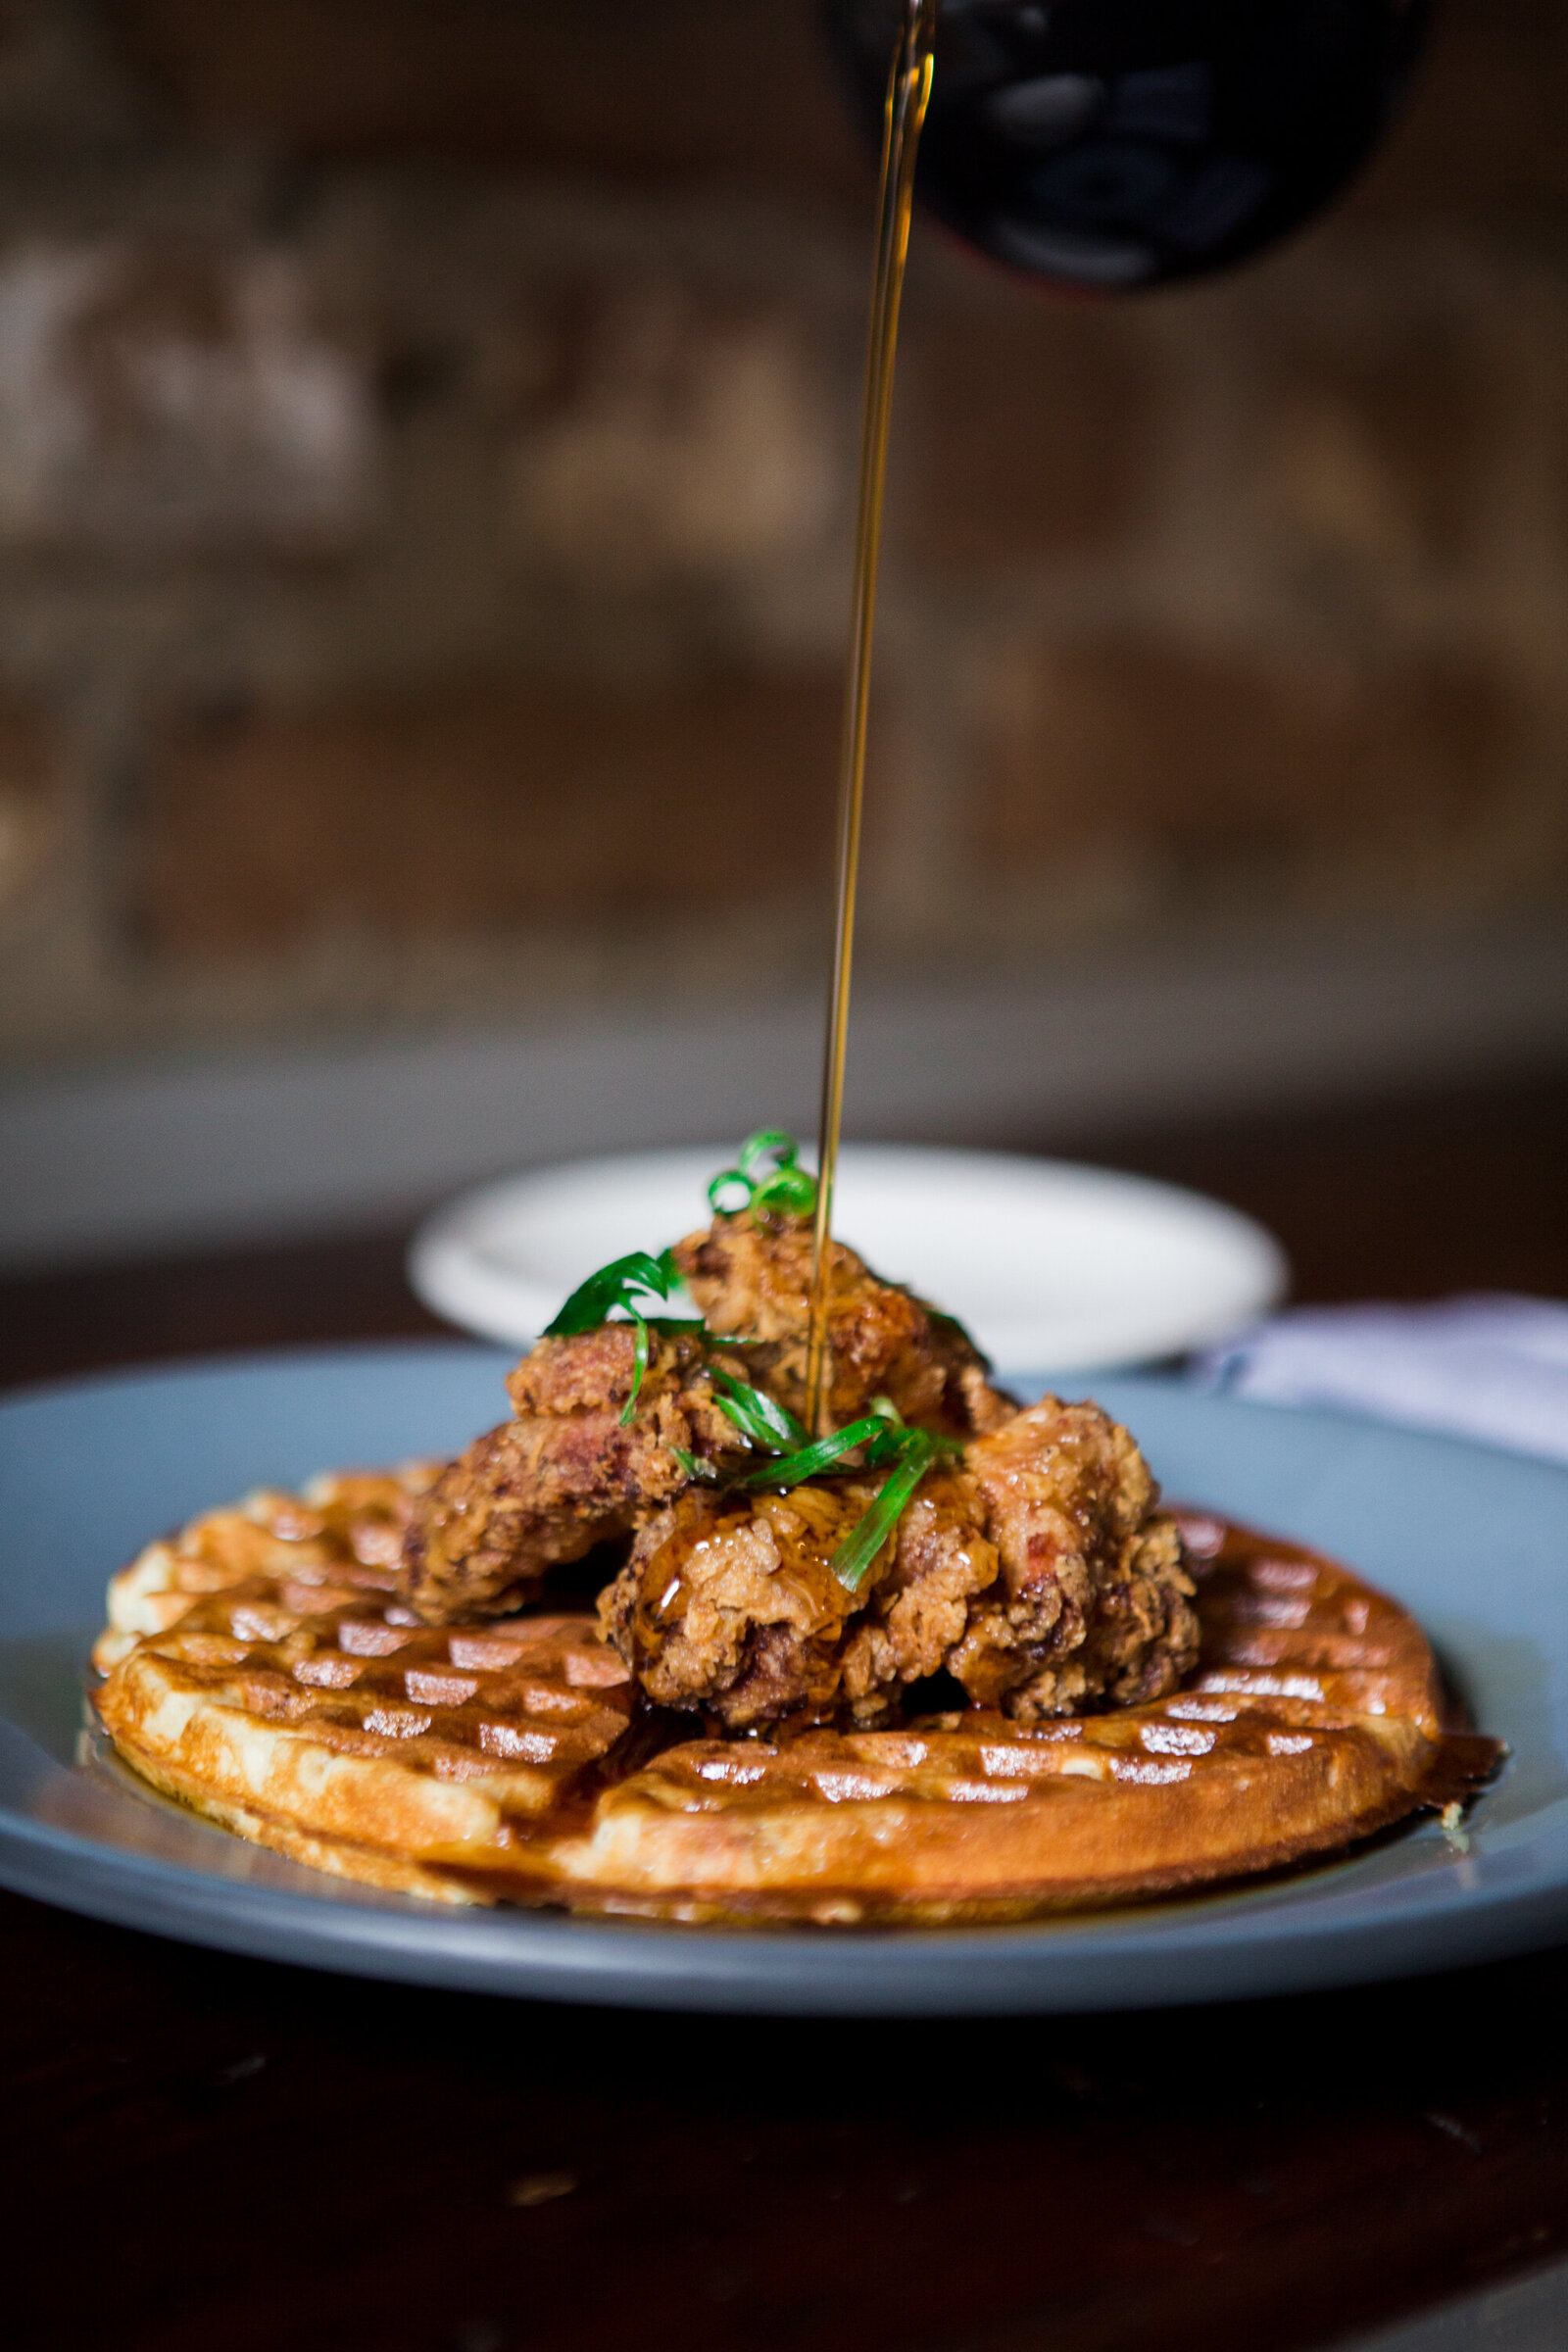 Chicken & Waffles at The Southern National Restaurant